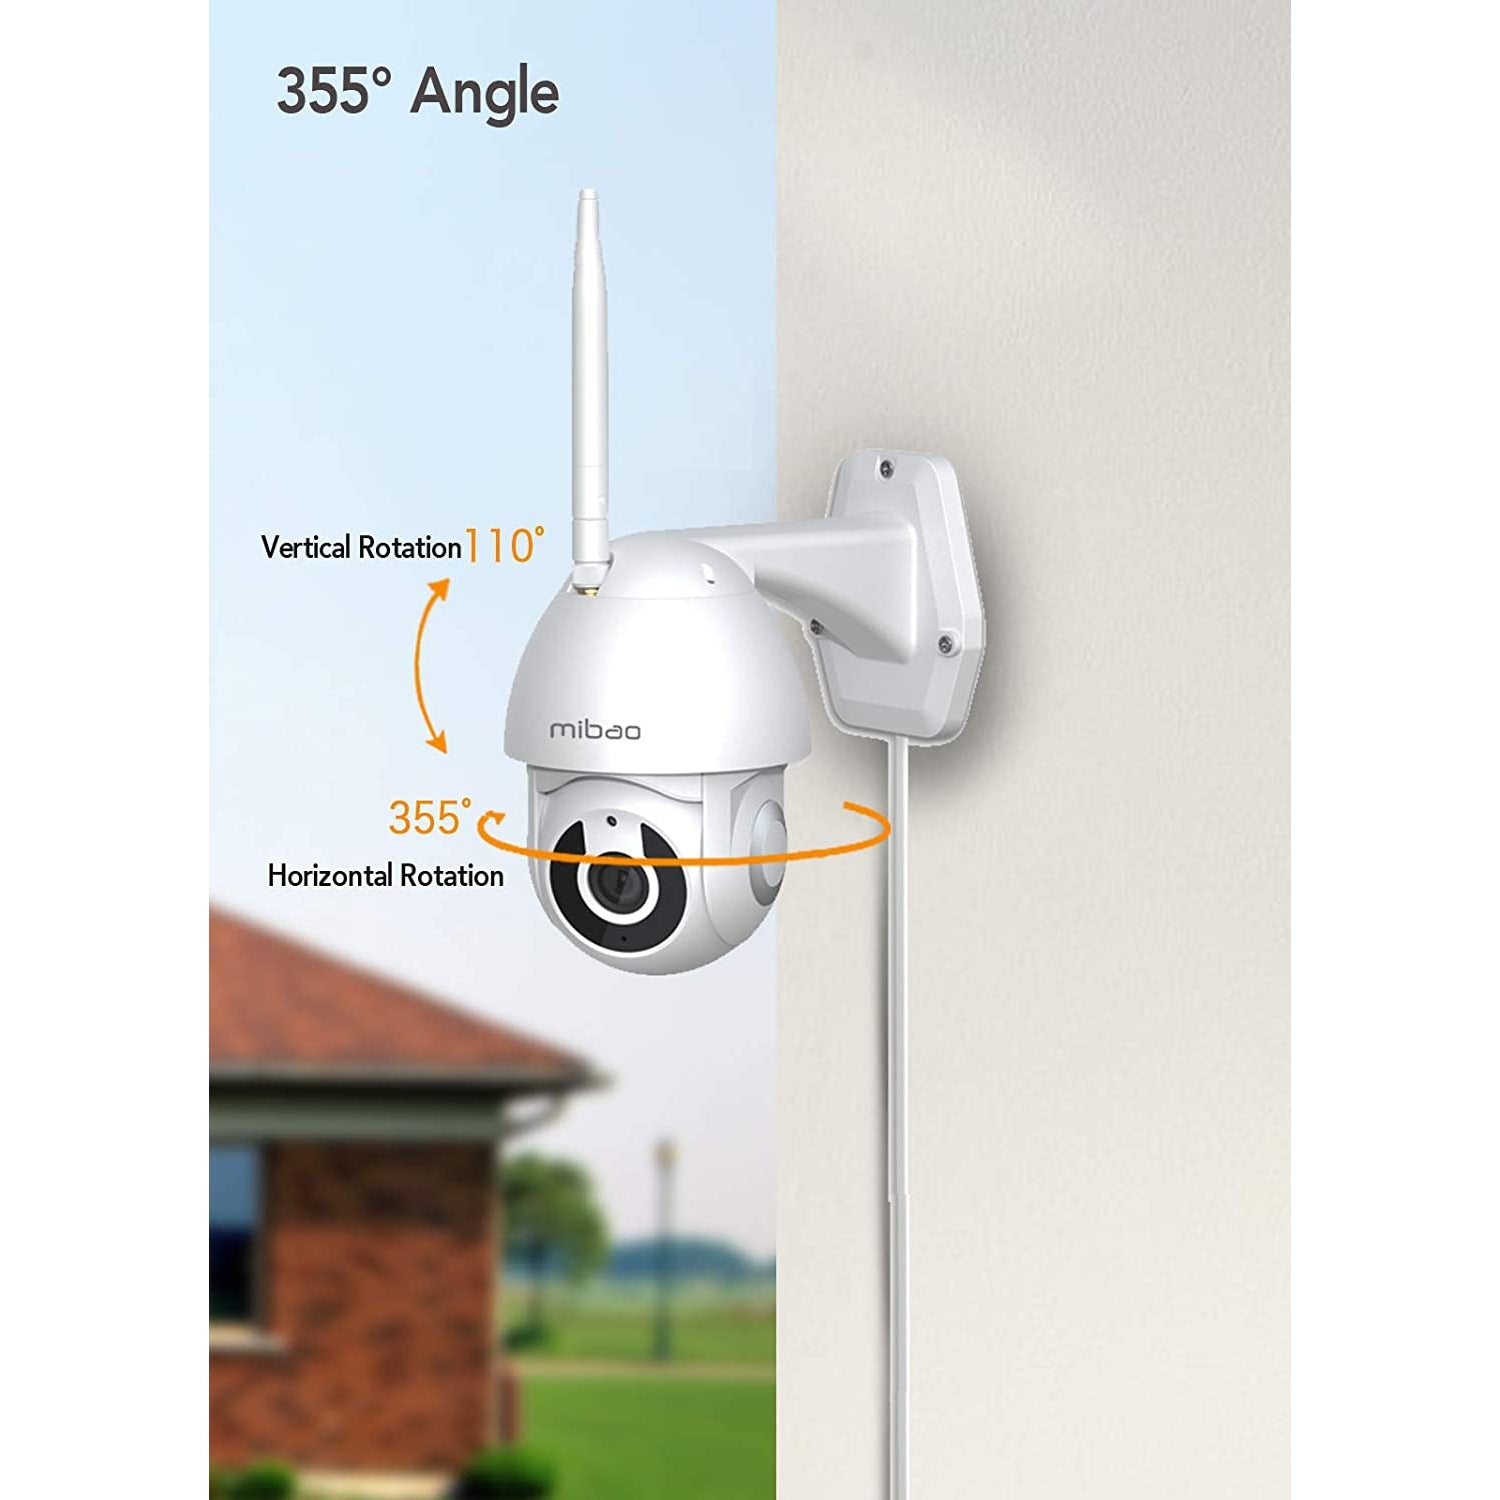 Mibao WiFi Home Security Camera with Pan/Tilt 360° View, IP66 Waterproof, Night Vision, Motion Detection, 2-Way Audio